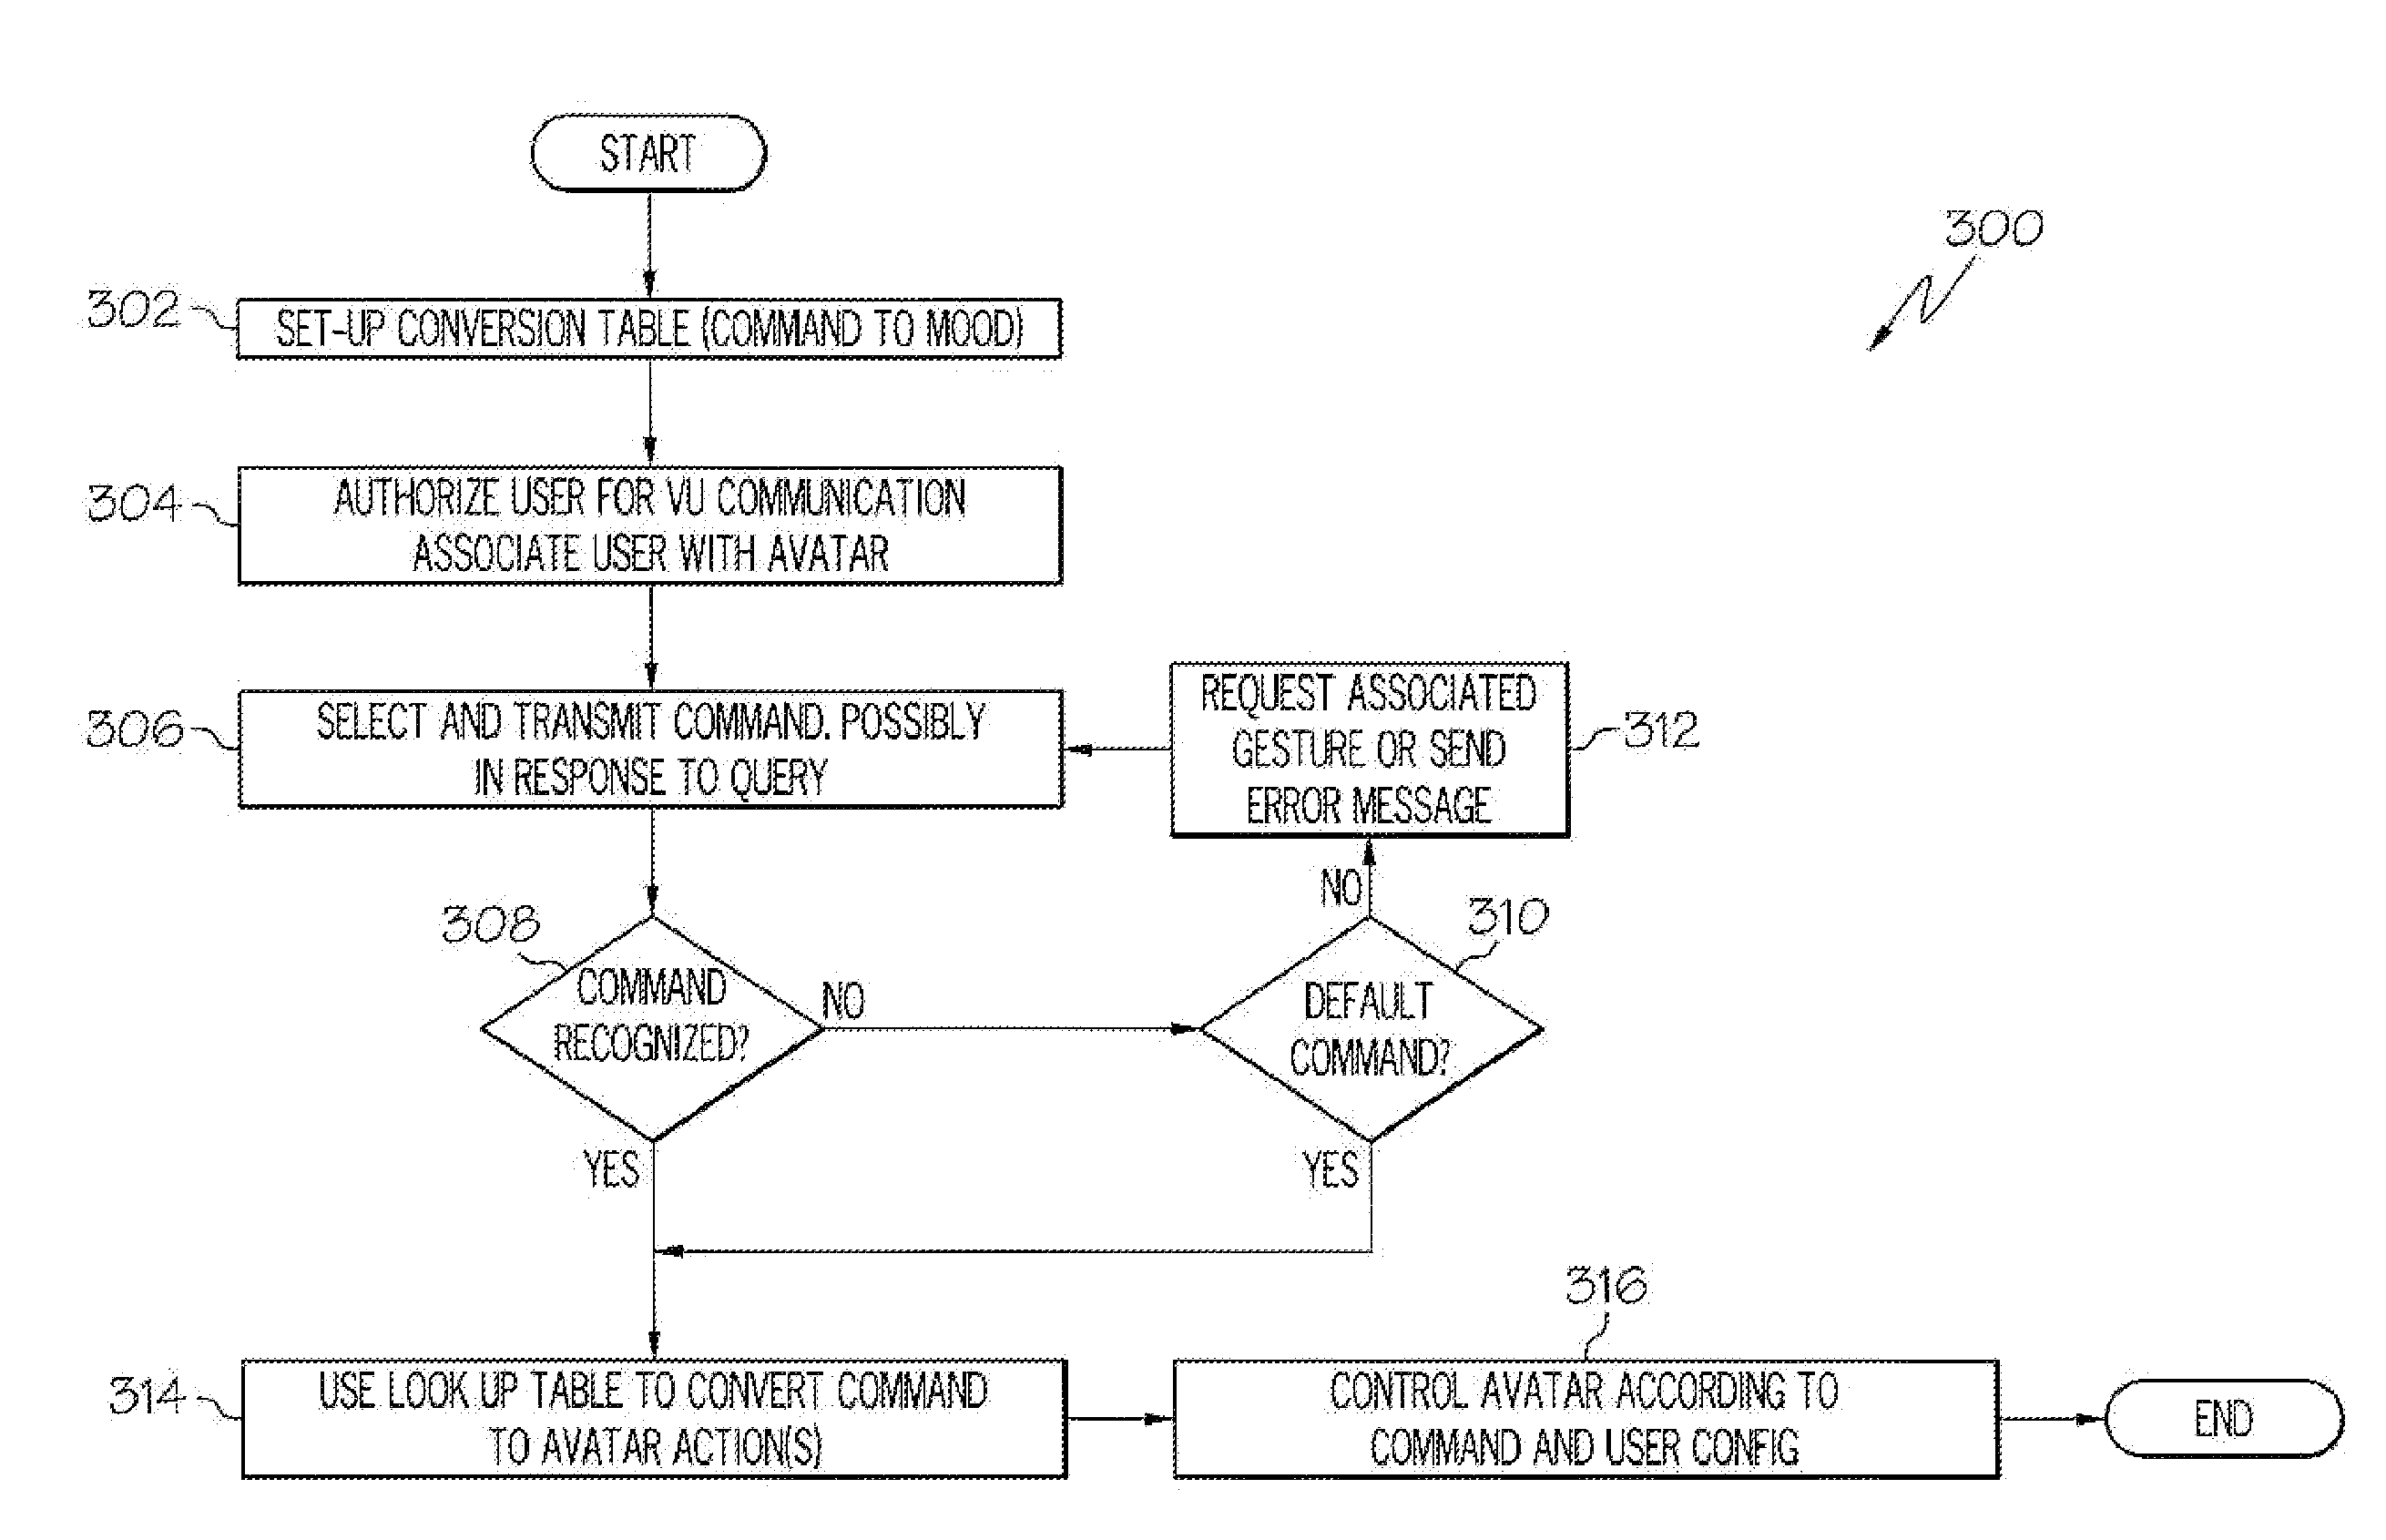 Arrangements for controlling activites of an avatar